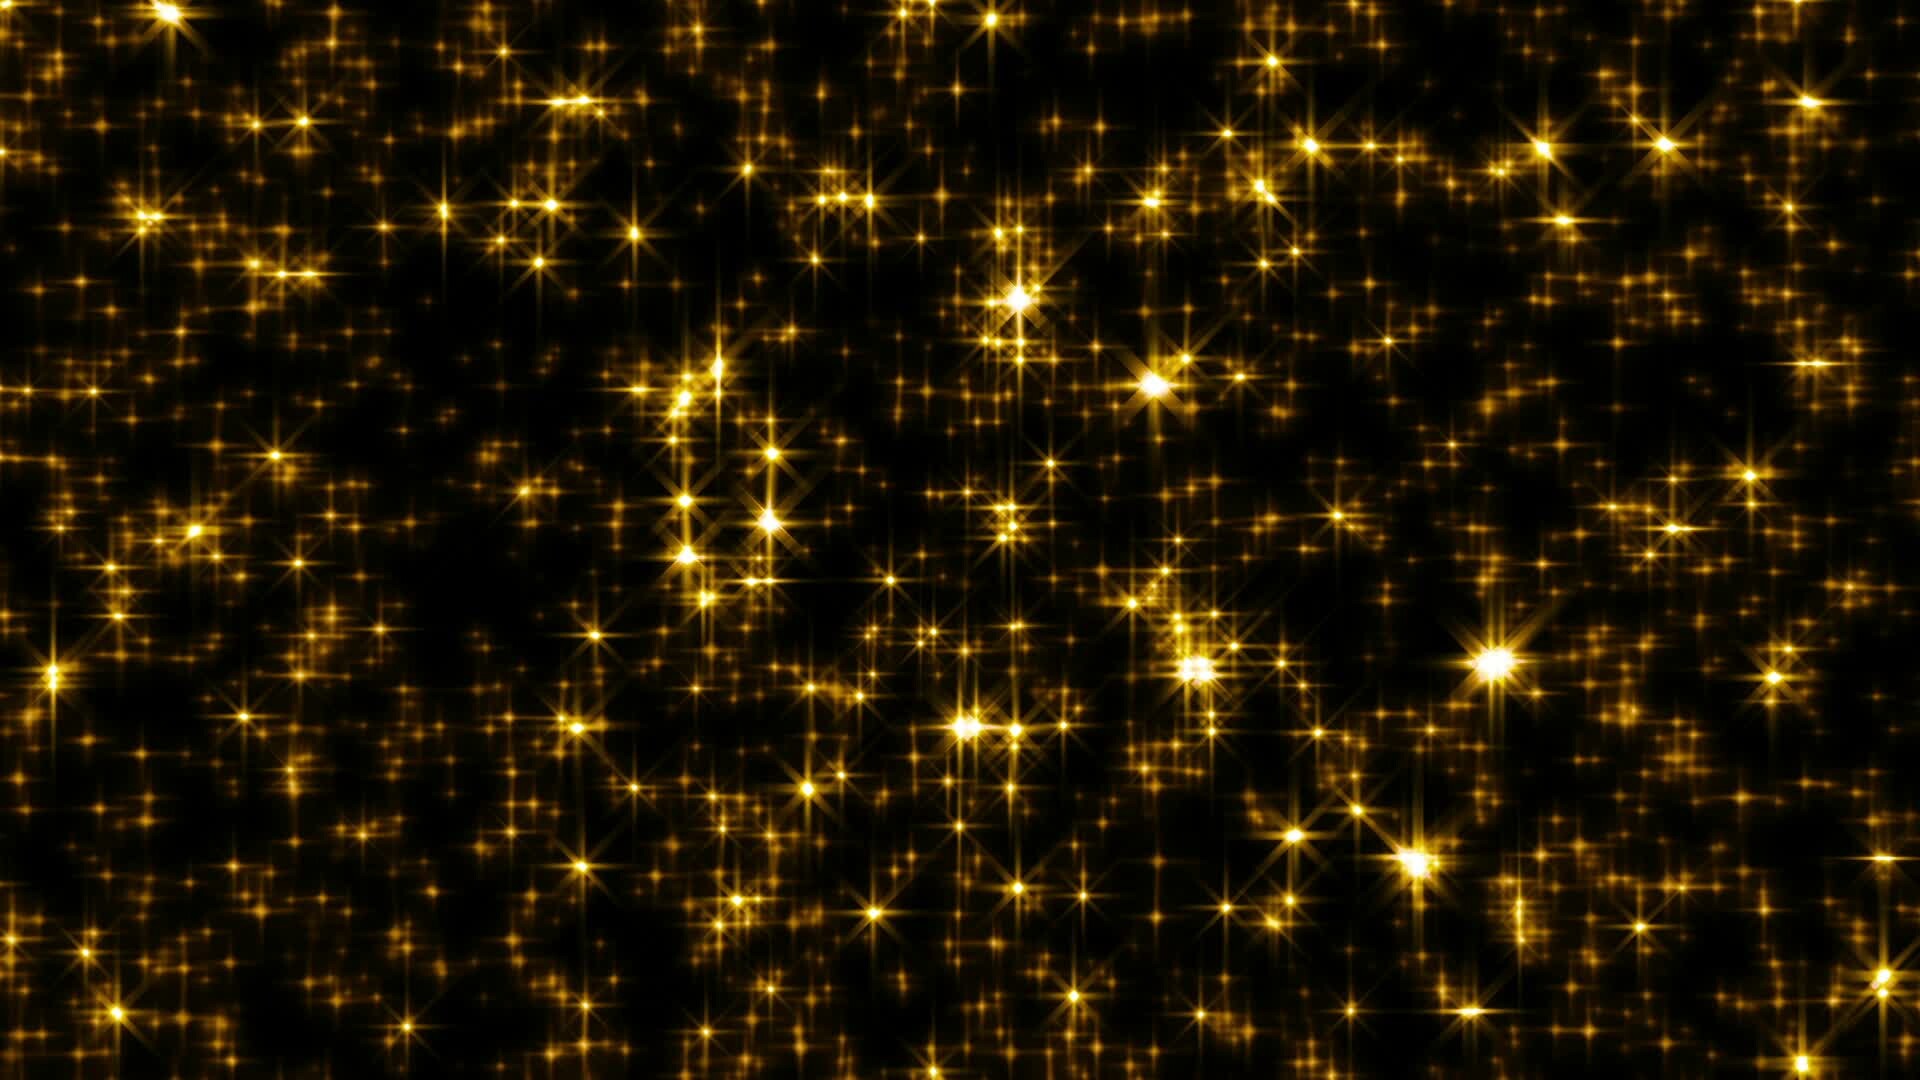 Gold Dots: The lights of the stars, A source of illumination, Astronomical object. 1920x1080 Full HD Wallpaper.